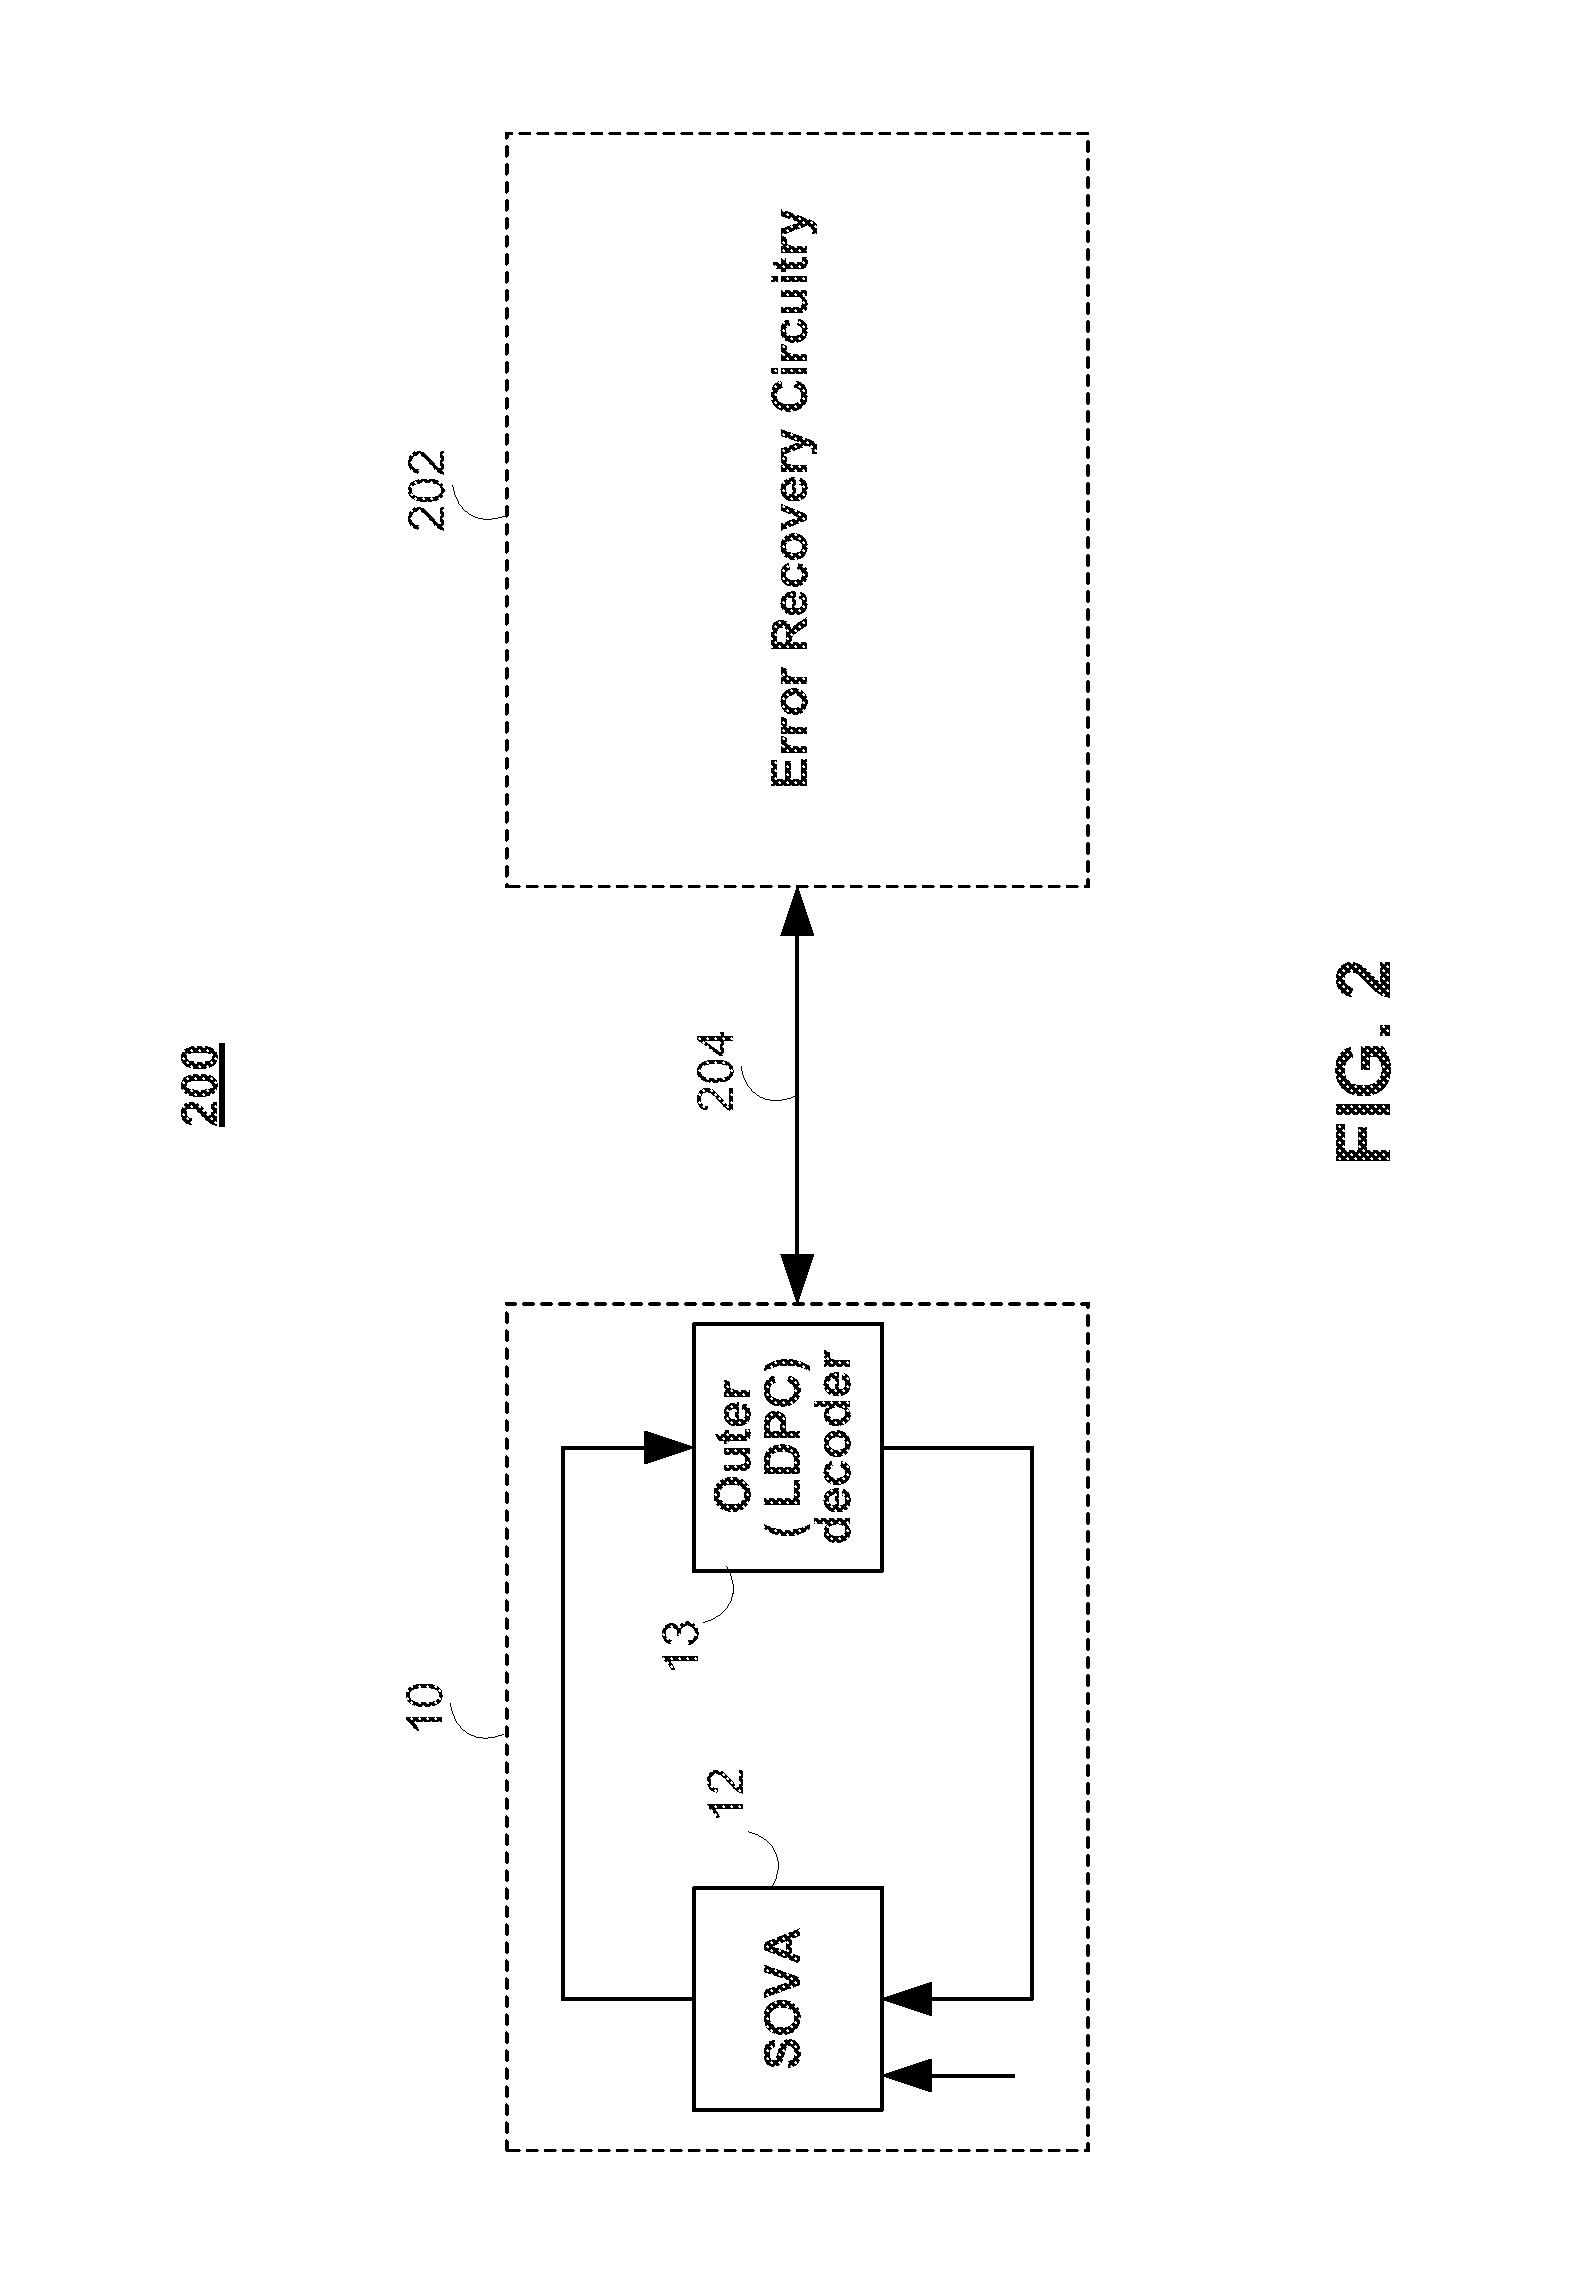 Methods and apparatus for error recovery in memory systems employing iterative codes